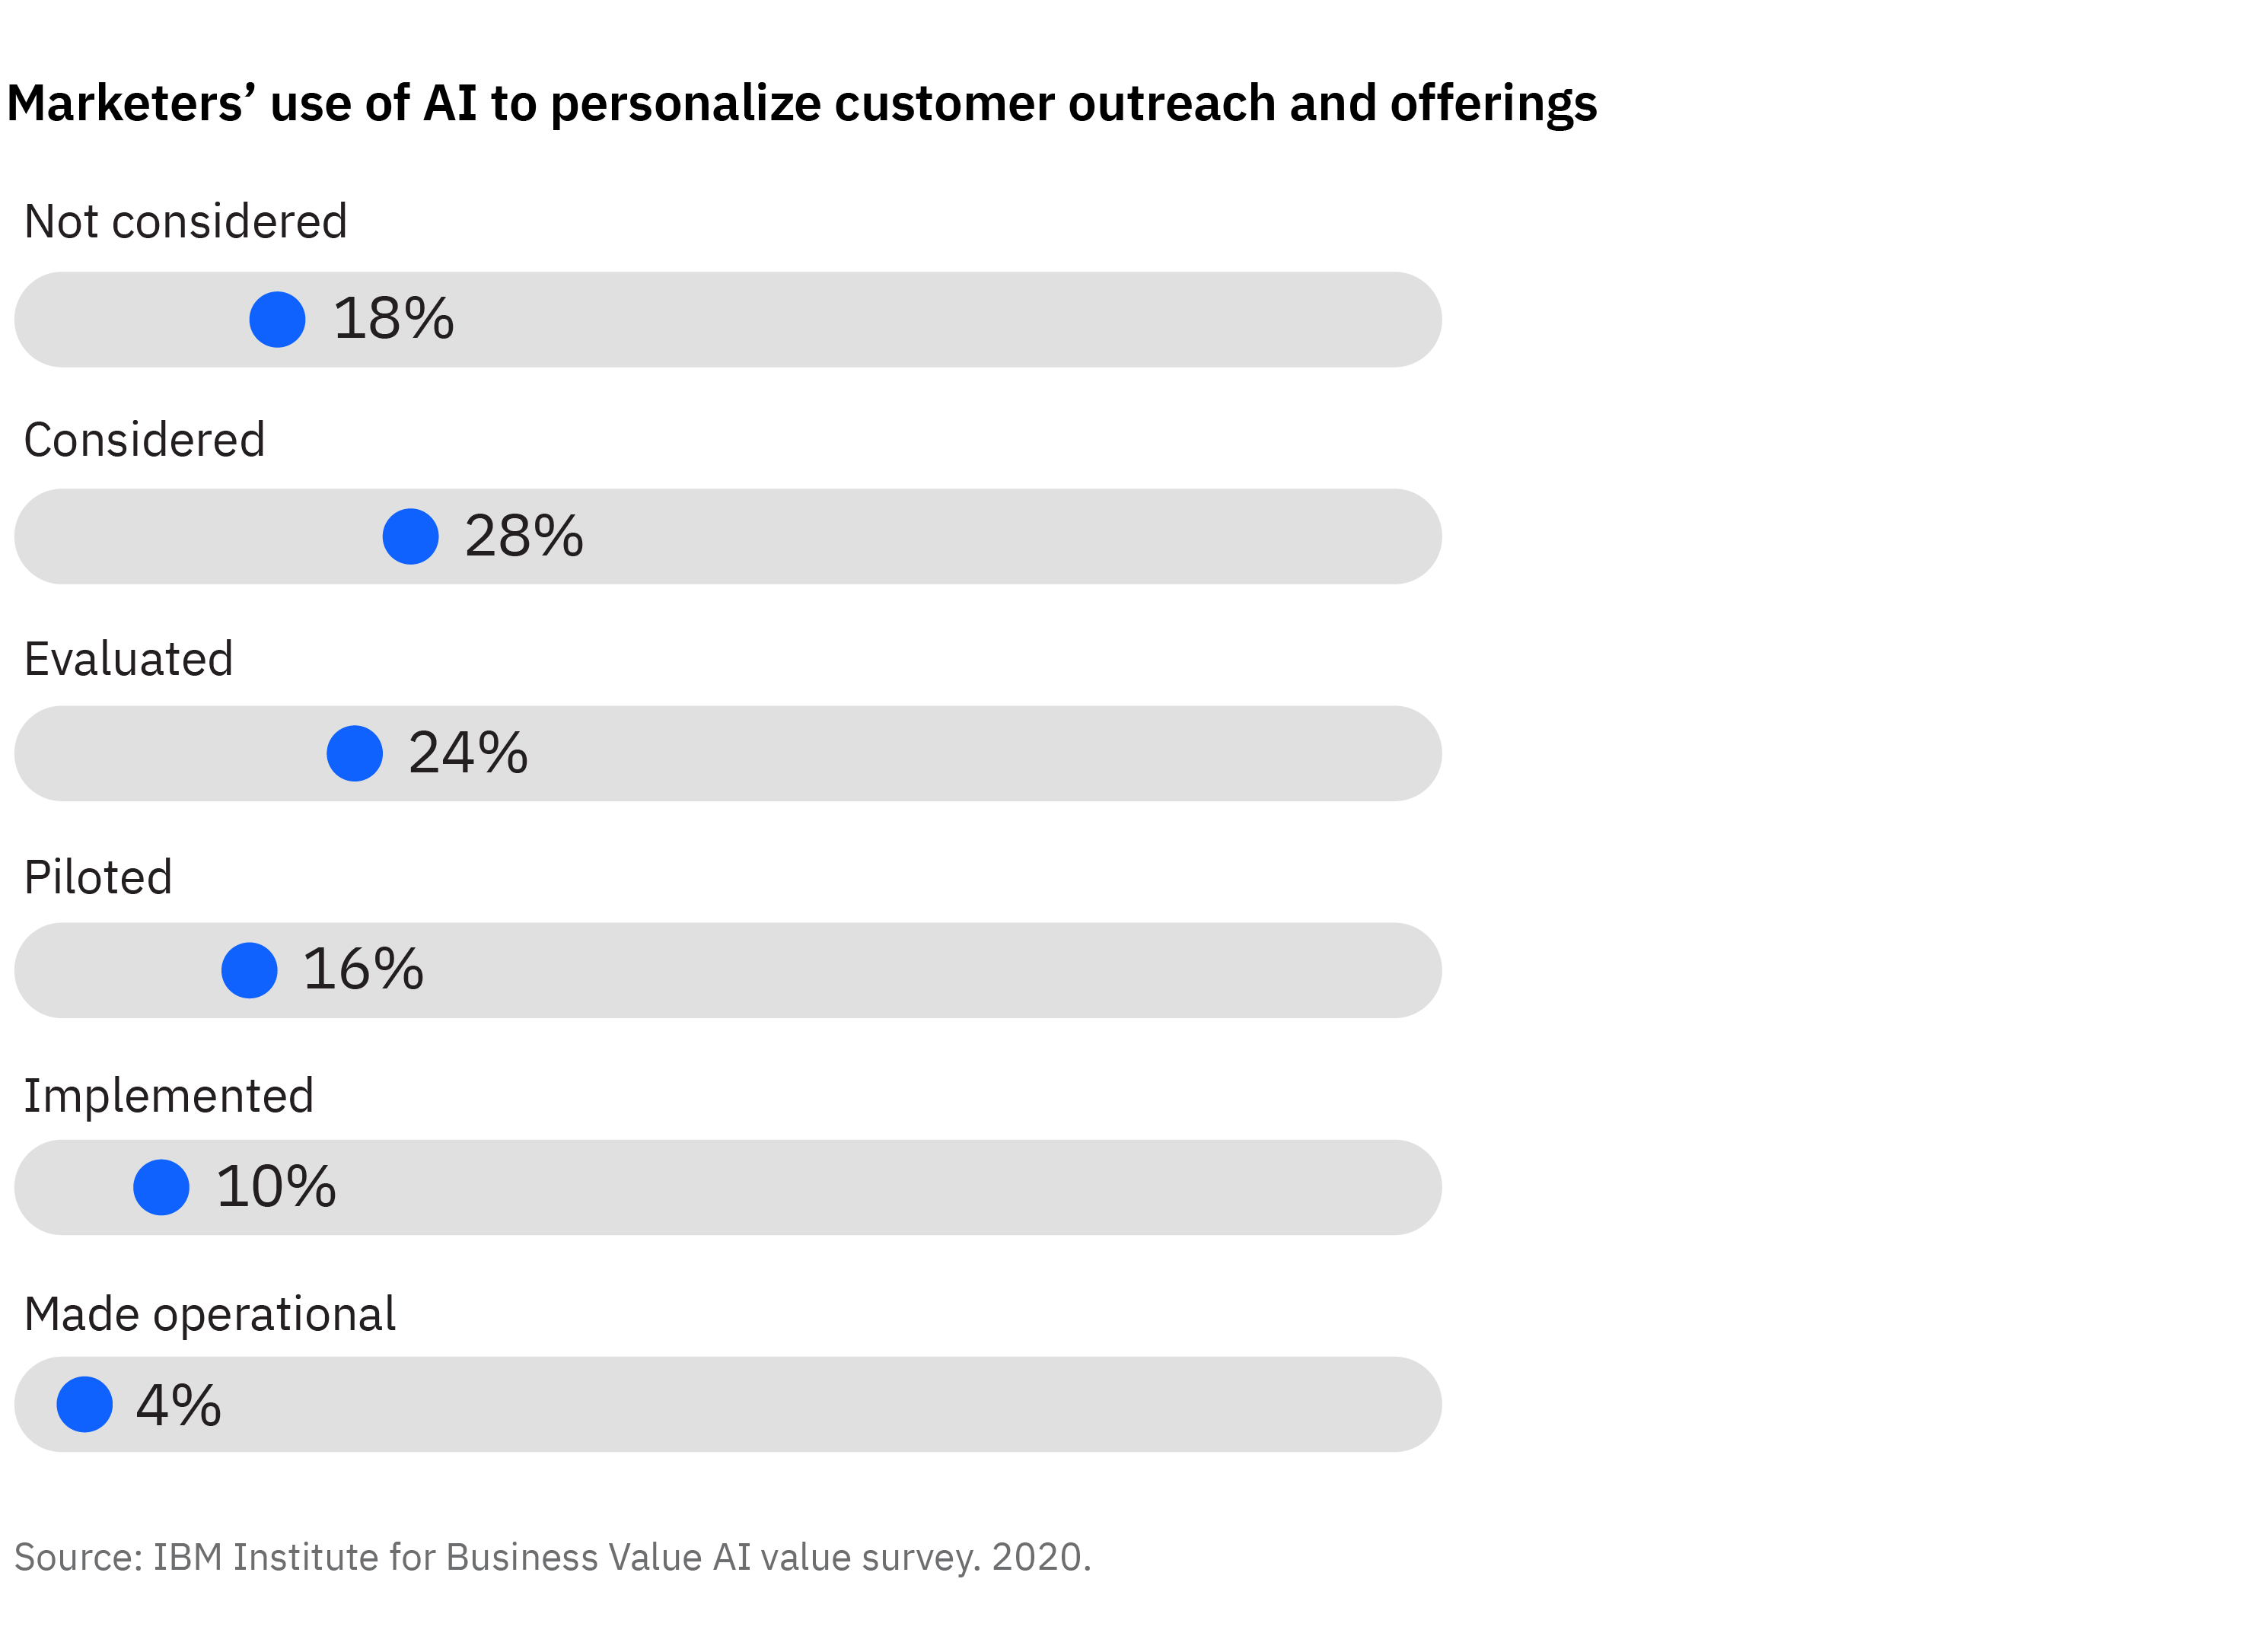 Marketers' use of AI to personalize customer outreach and offerings